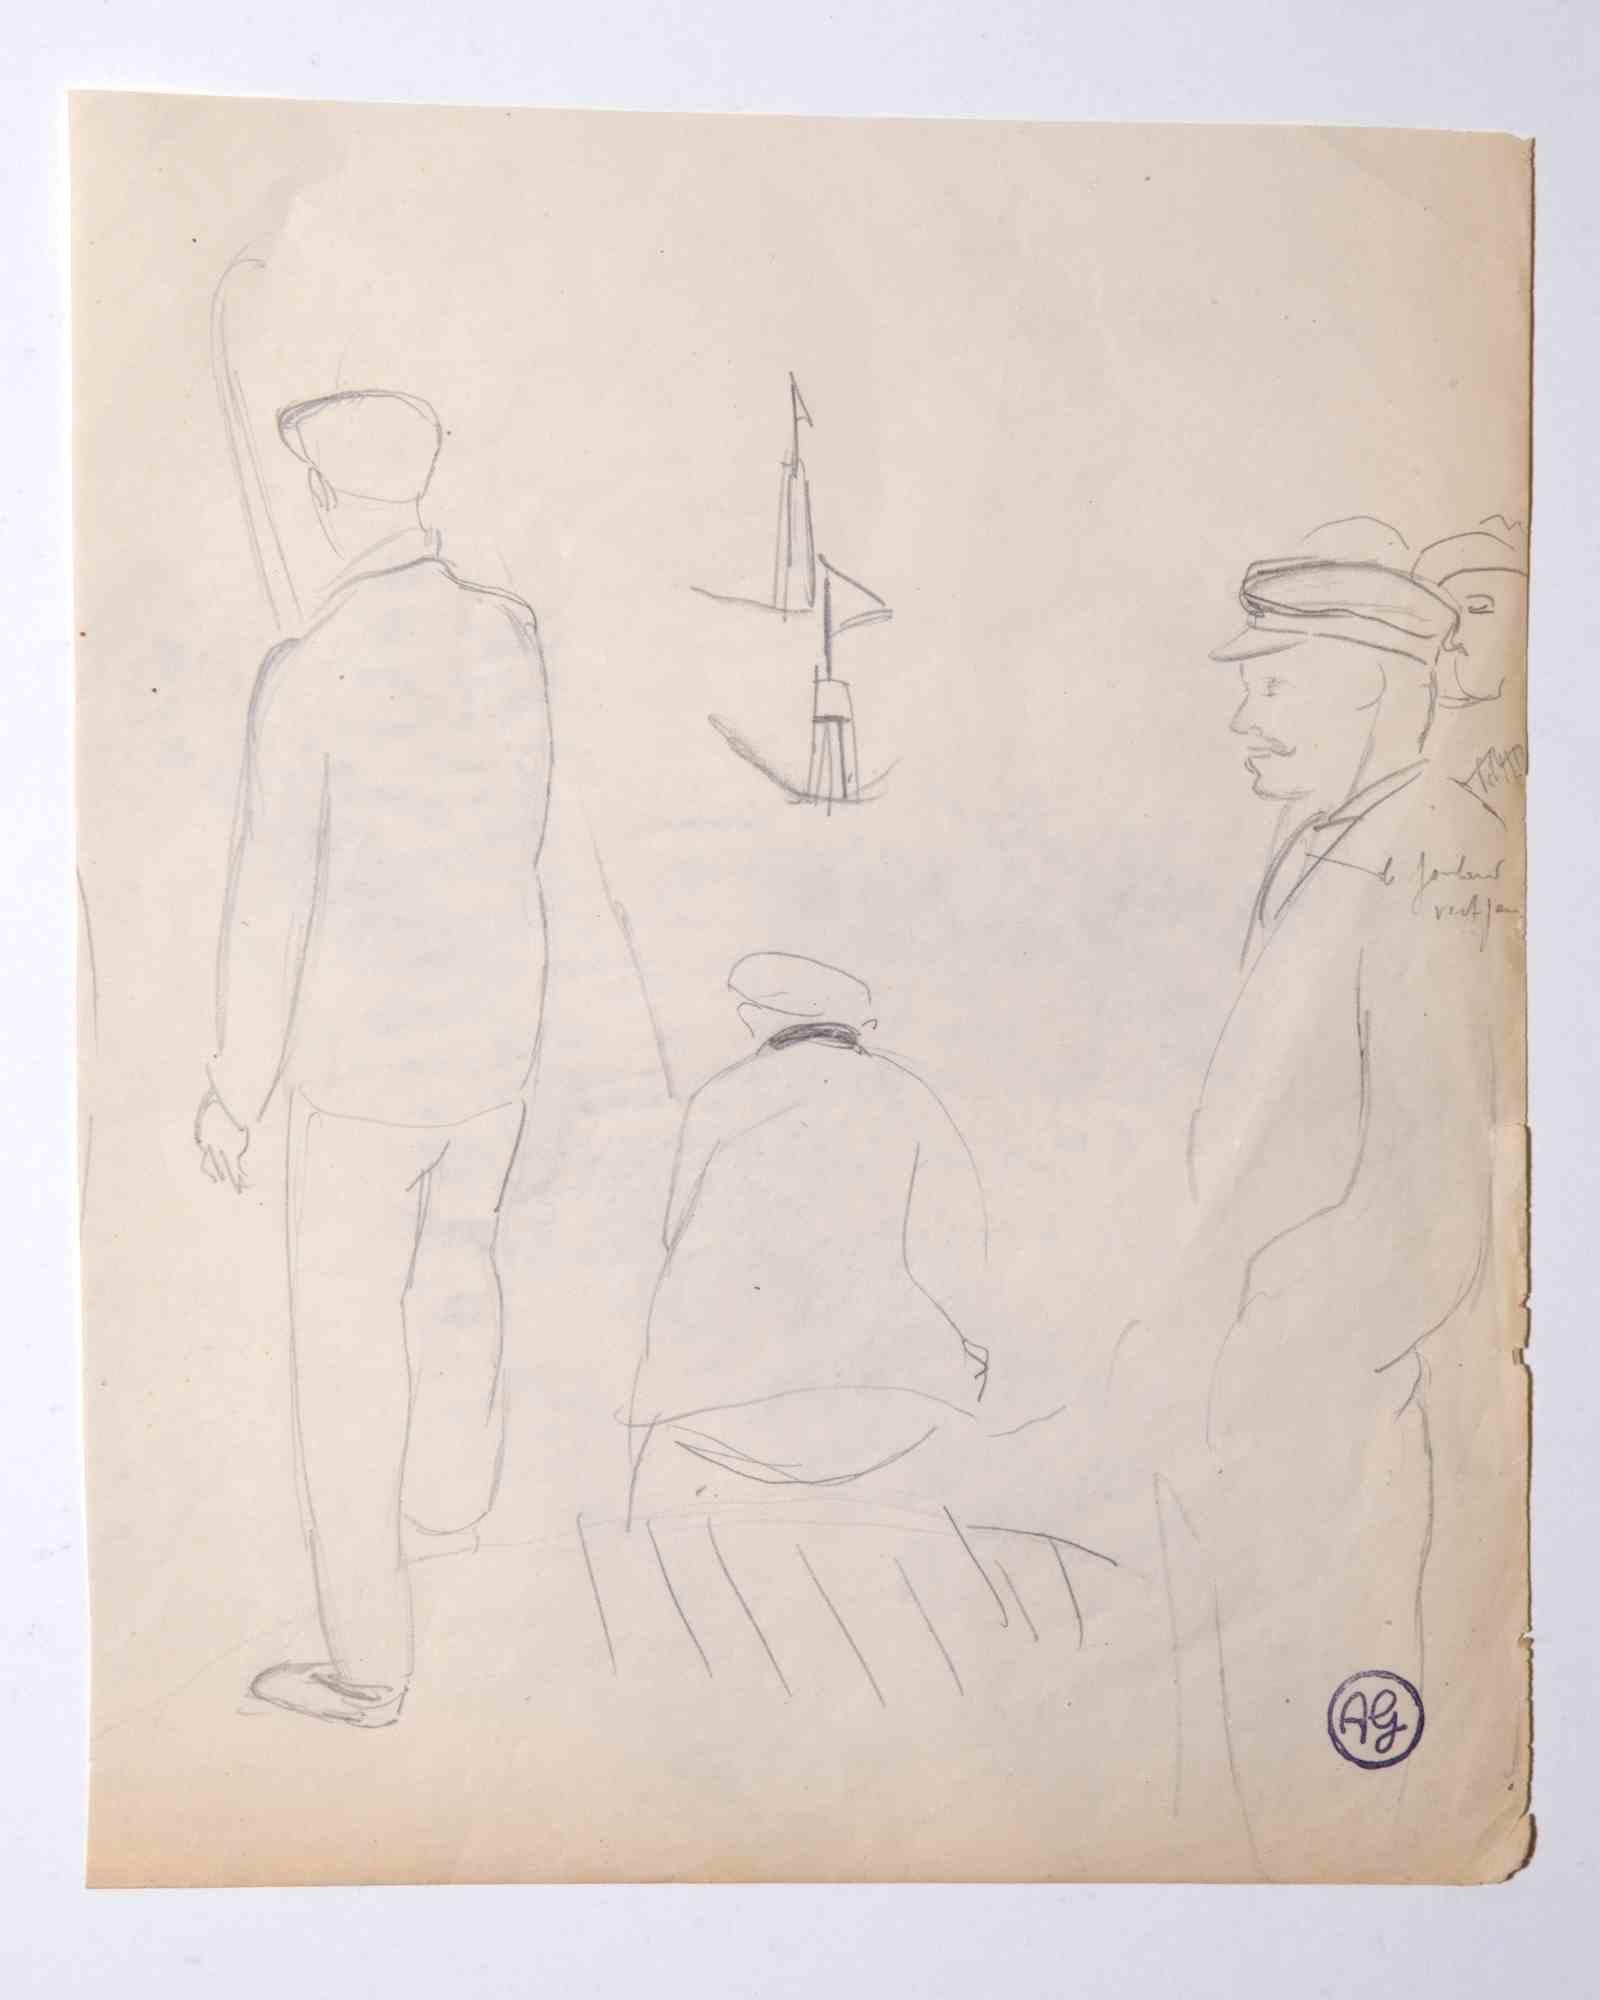 Unknown Figurative Art - Workers - Original Drawing - Mid 20th Century